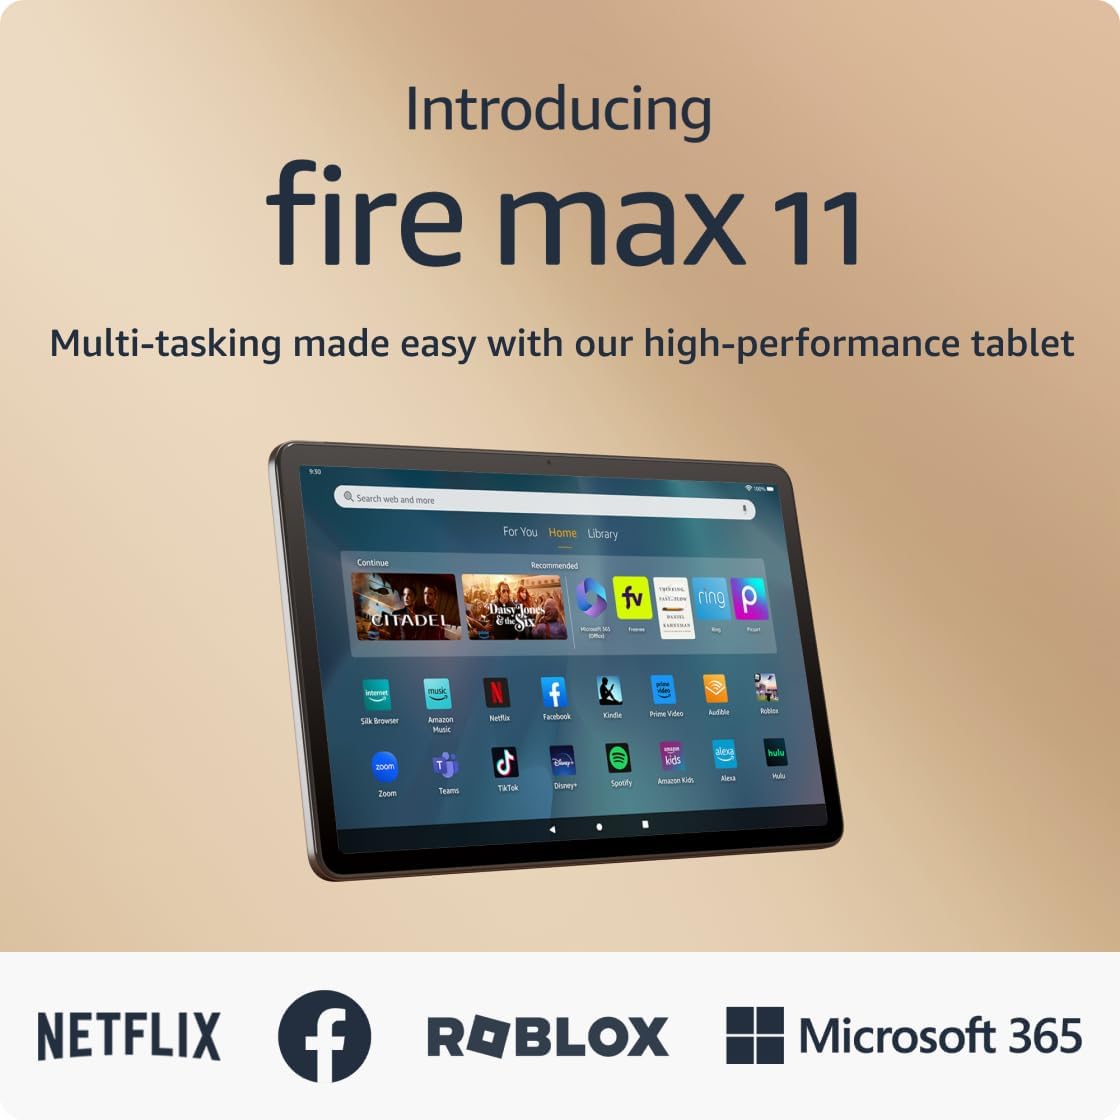 Introducing Amazon Fire Max 11 tablet, built for [...]